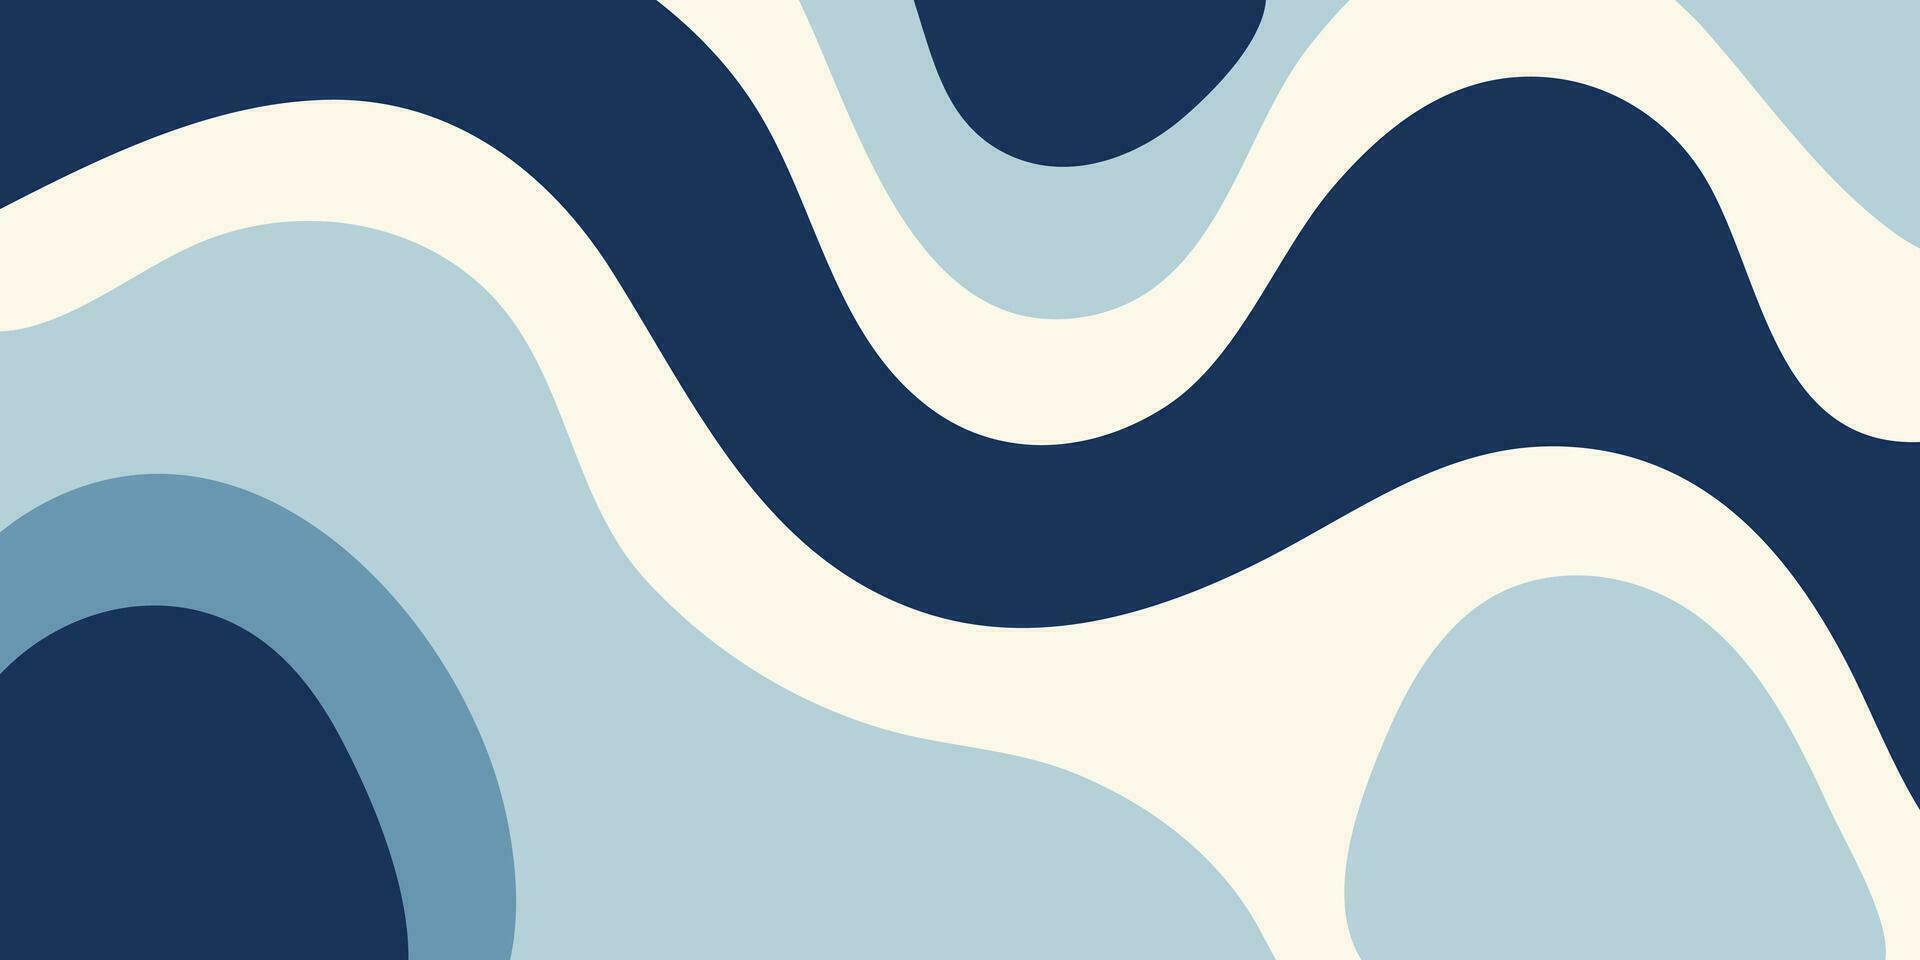 Abstract retro background with colorful waves. Trendy vector illustration in groovy style 60s-70s. Pastel and navy blue colors